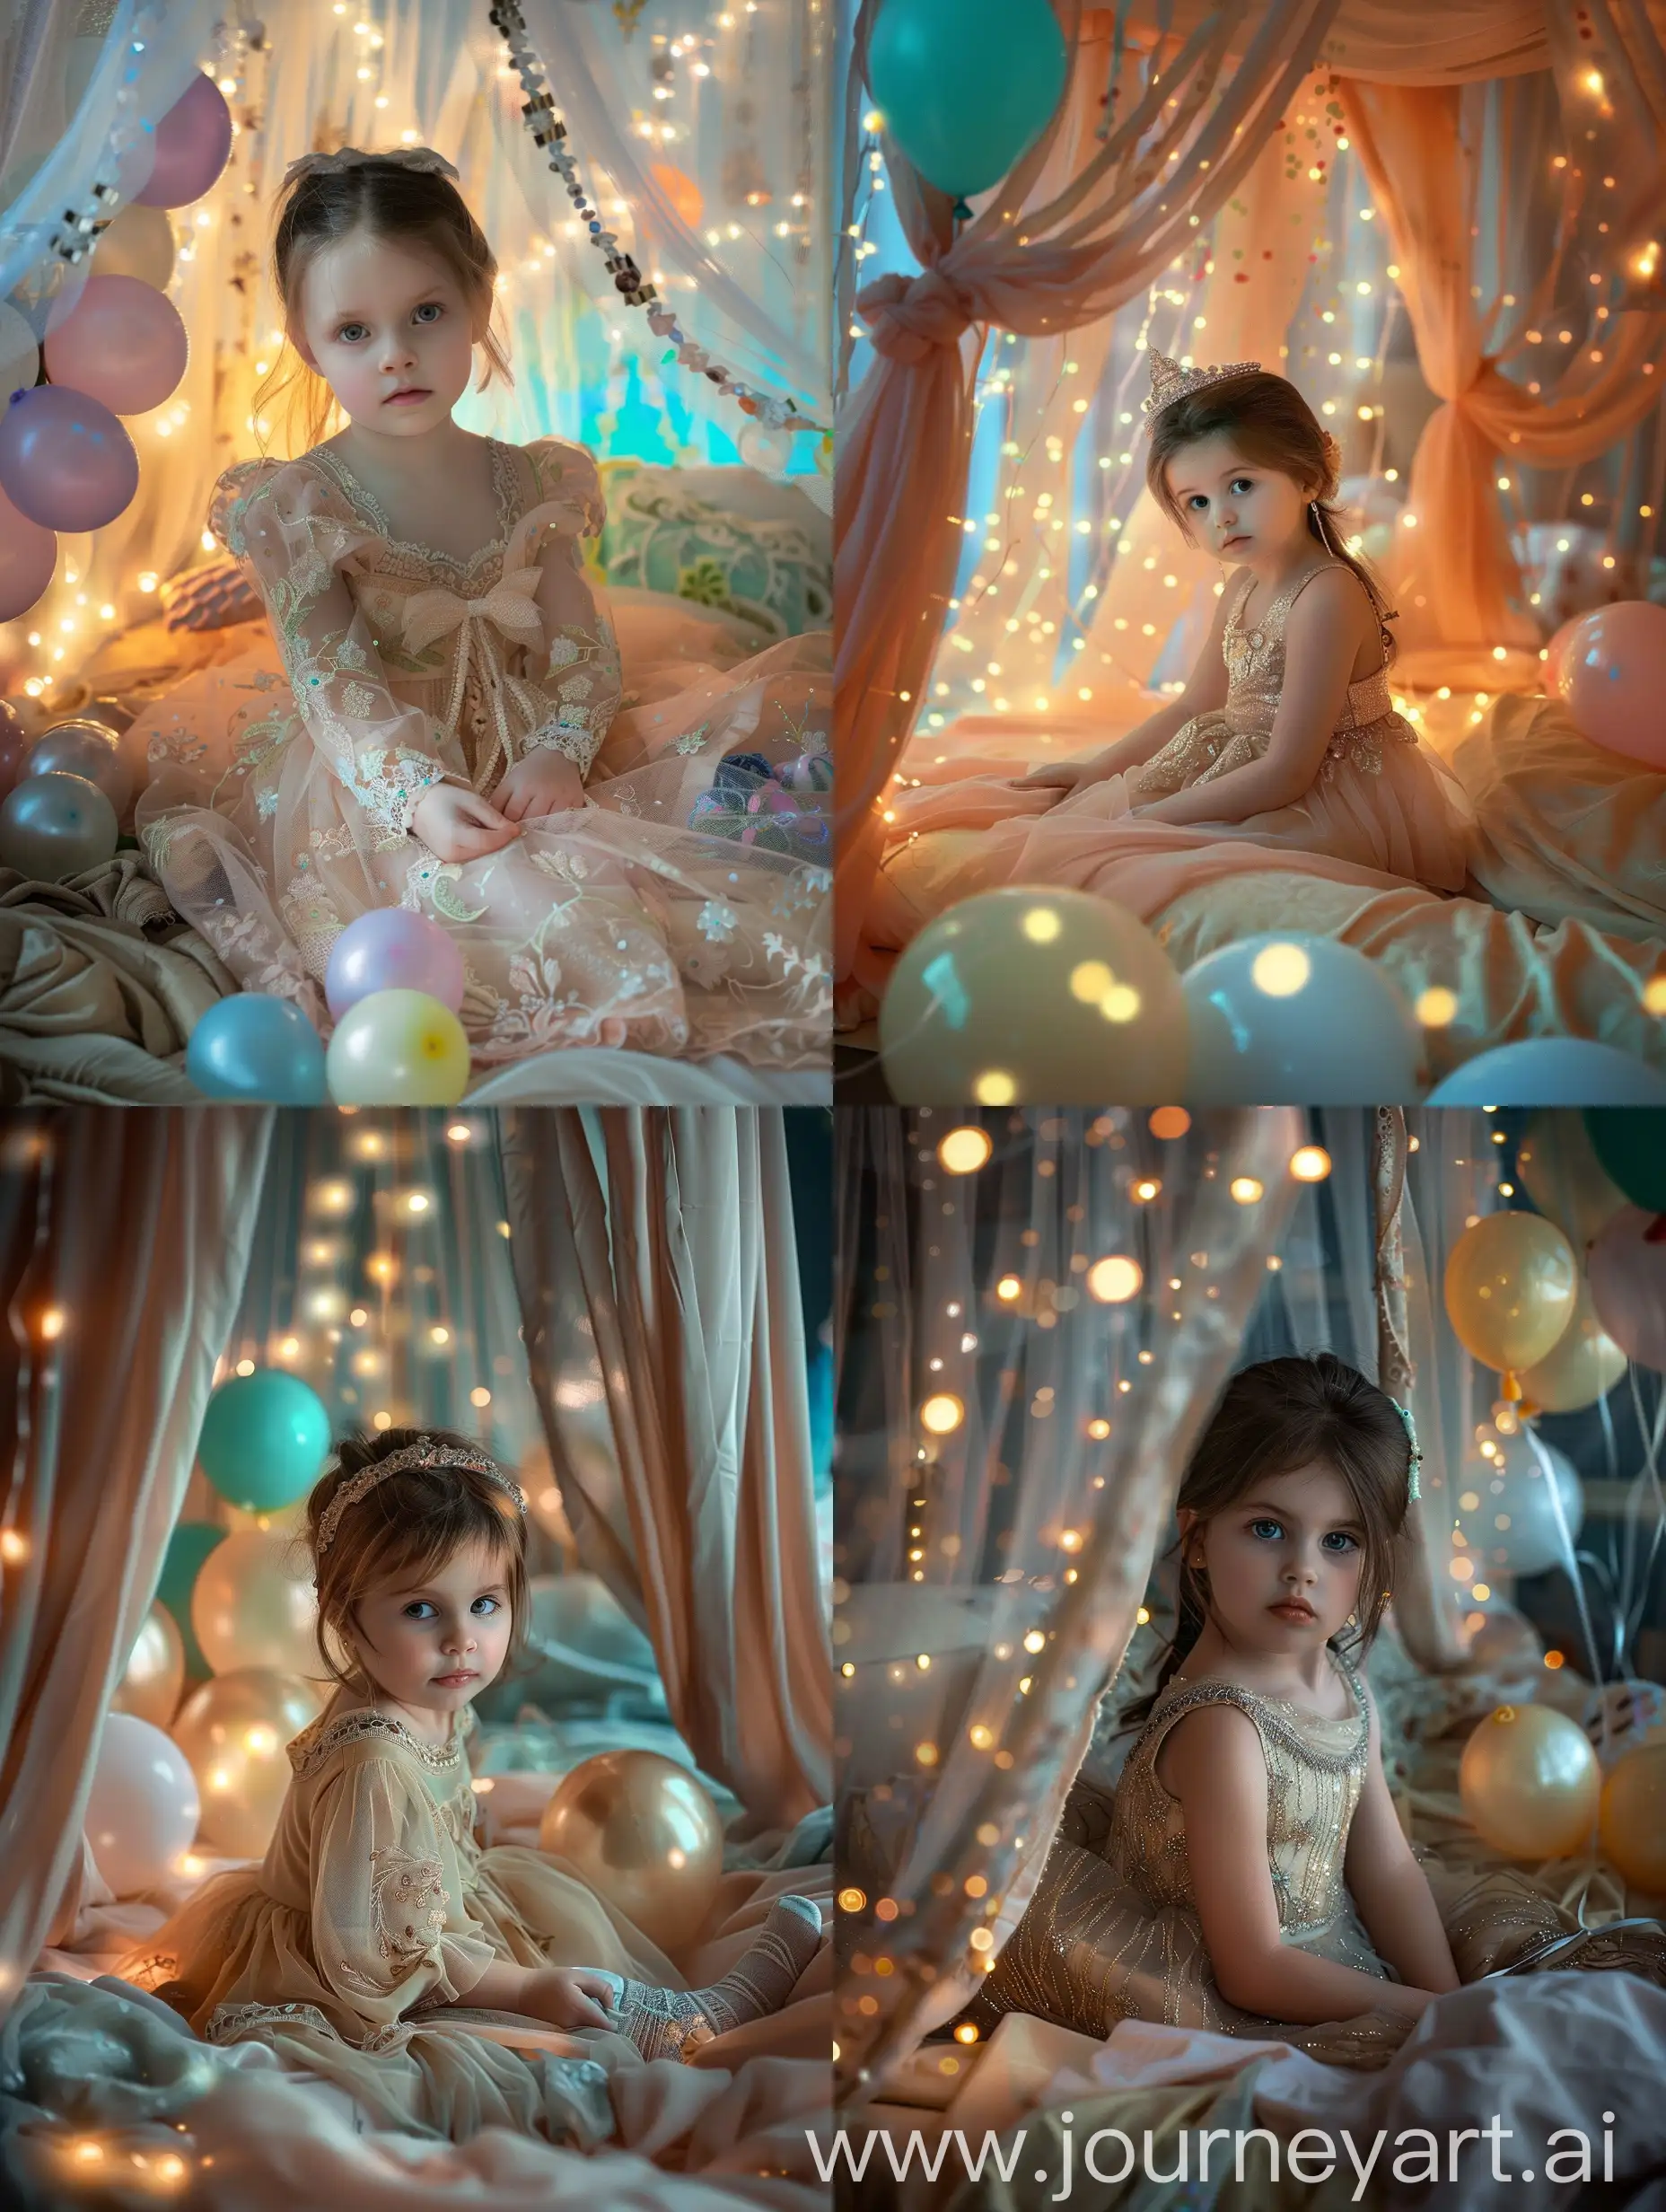 Enchanting-Little-Girl-Sitting-on-Canopy-Bed-with-Glowing-Lights-and-Balloons